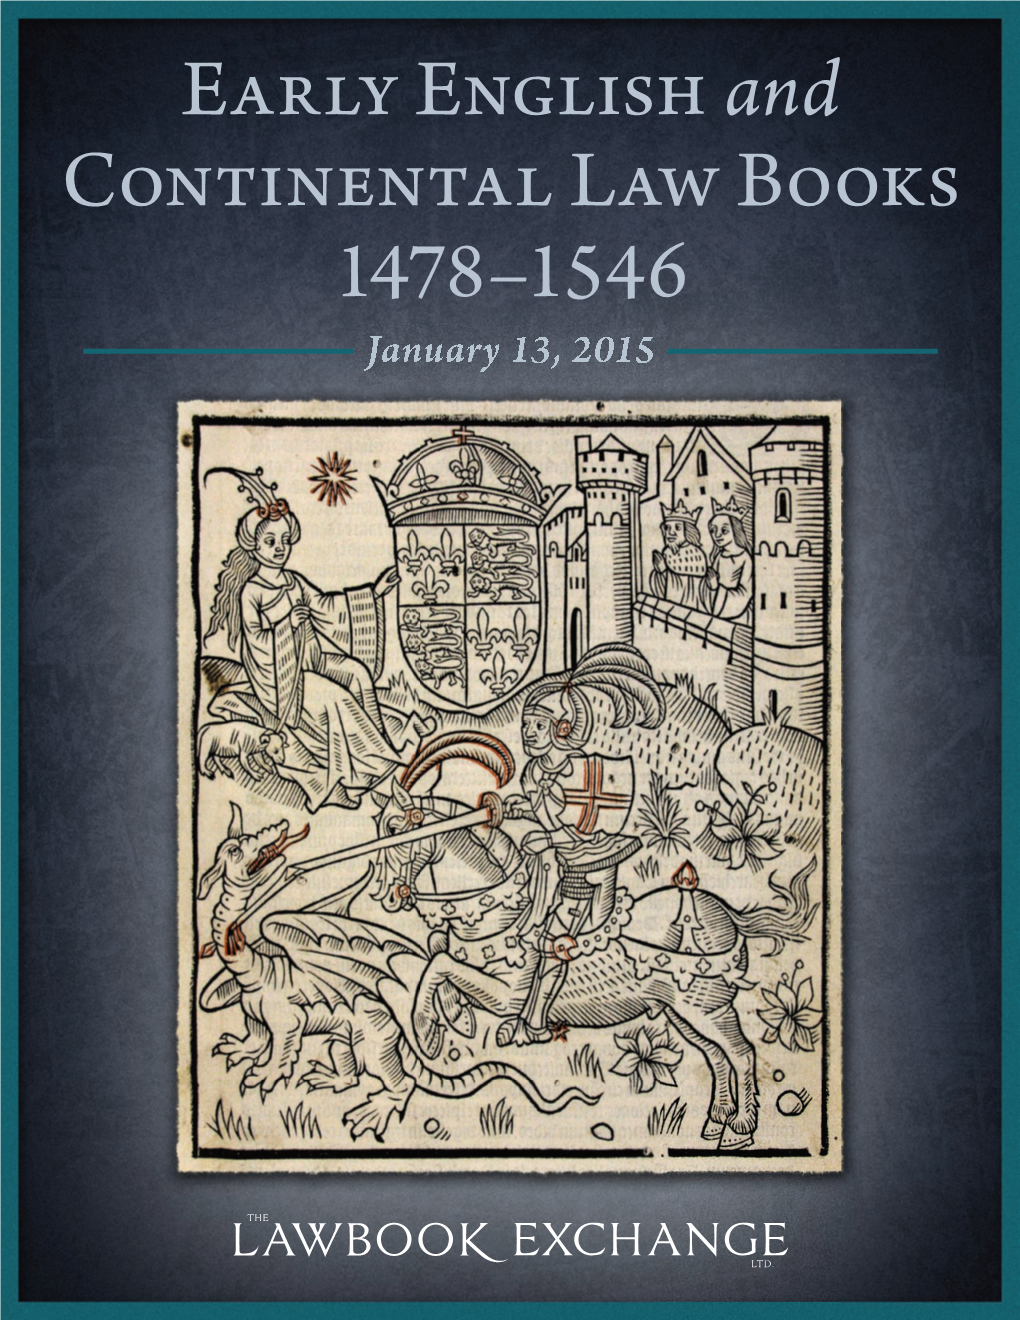 Early English and Continental Law Books 1478–1546 January 13, 2015 the Lawbook Exchange, Ltd